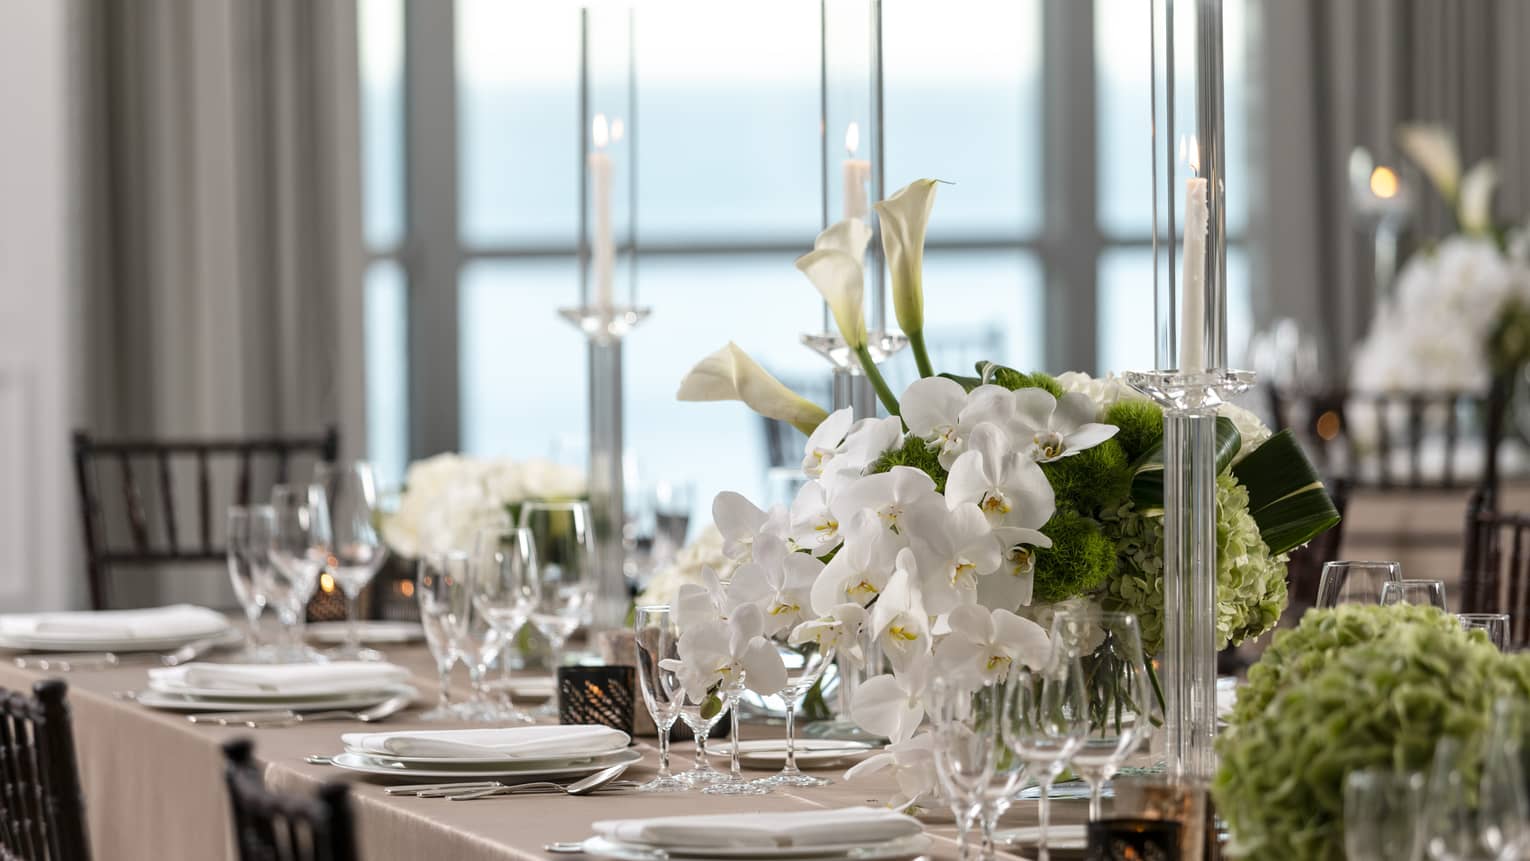 Part of formally set dining table with white orchids and tall crystal candlesticks